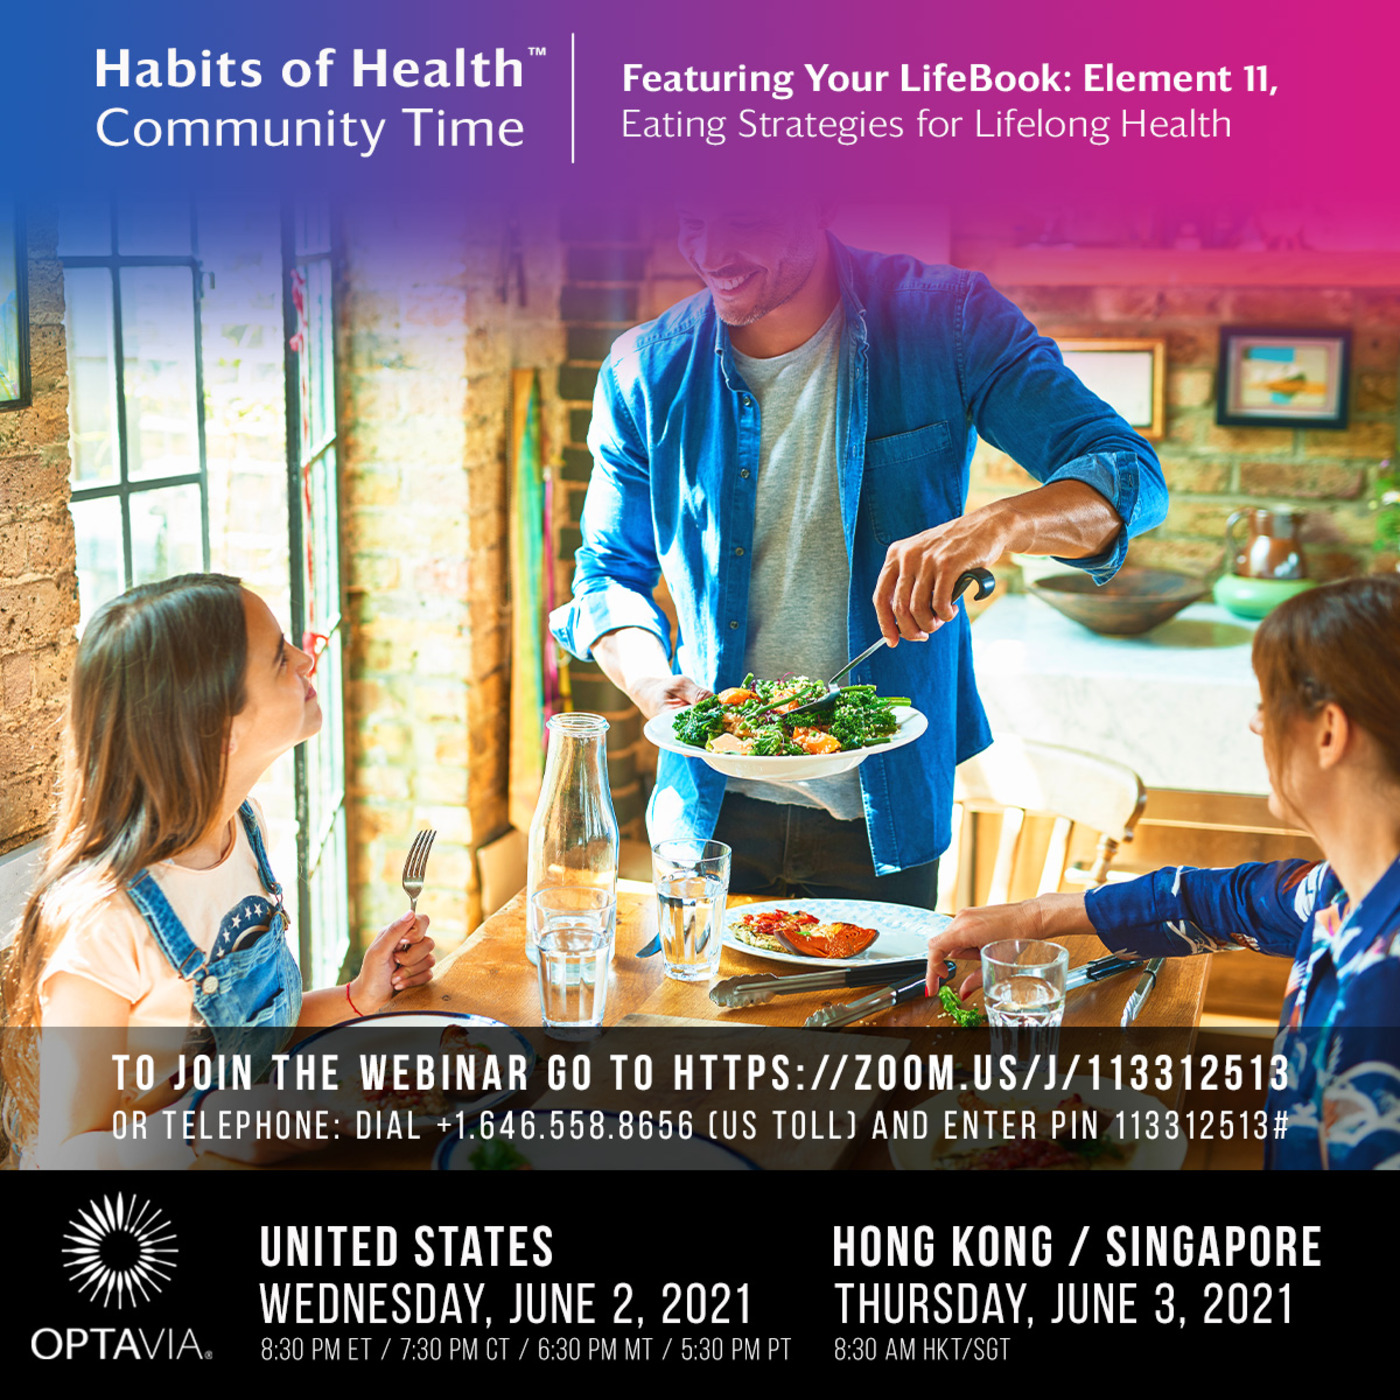 Episode 227: Your LifeBook, Element 11: Eating Strategies for Lifelong Health